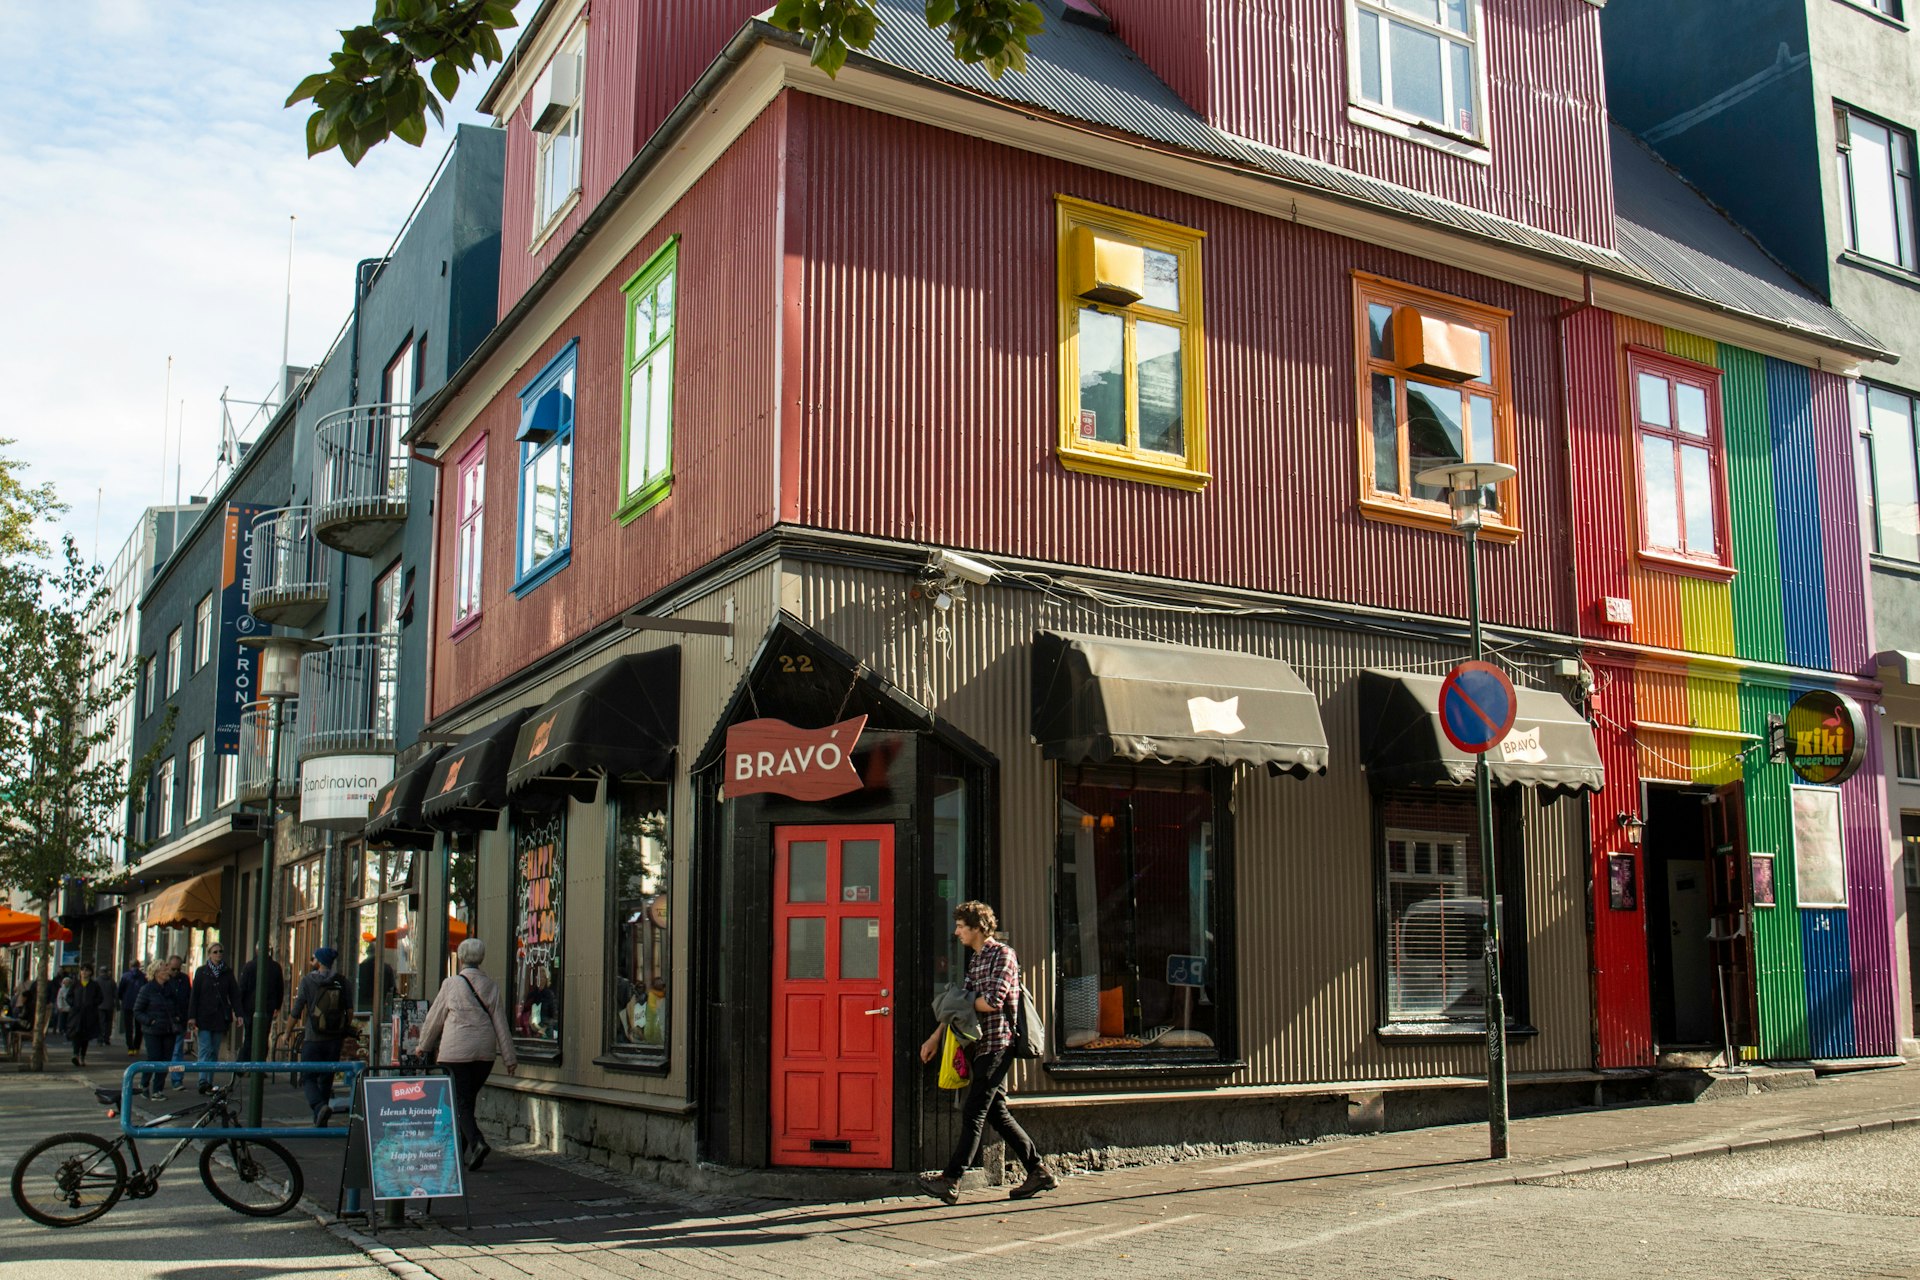 Colourful facades of the Bravó bar and Kíkí Queer Bar in Reykjavik.